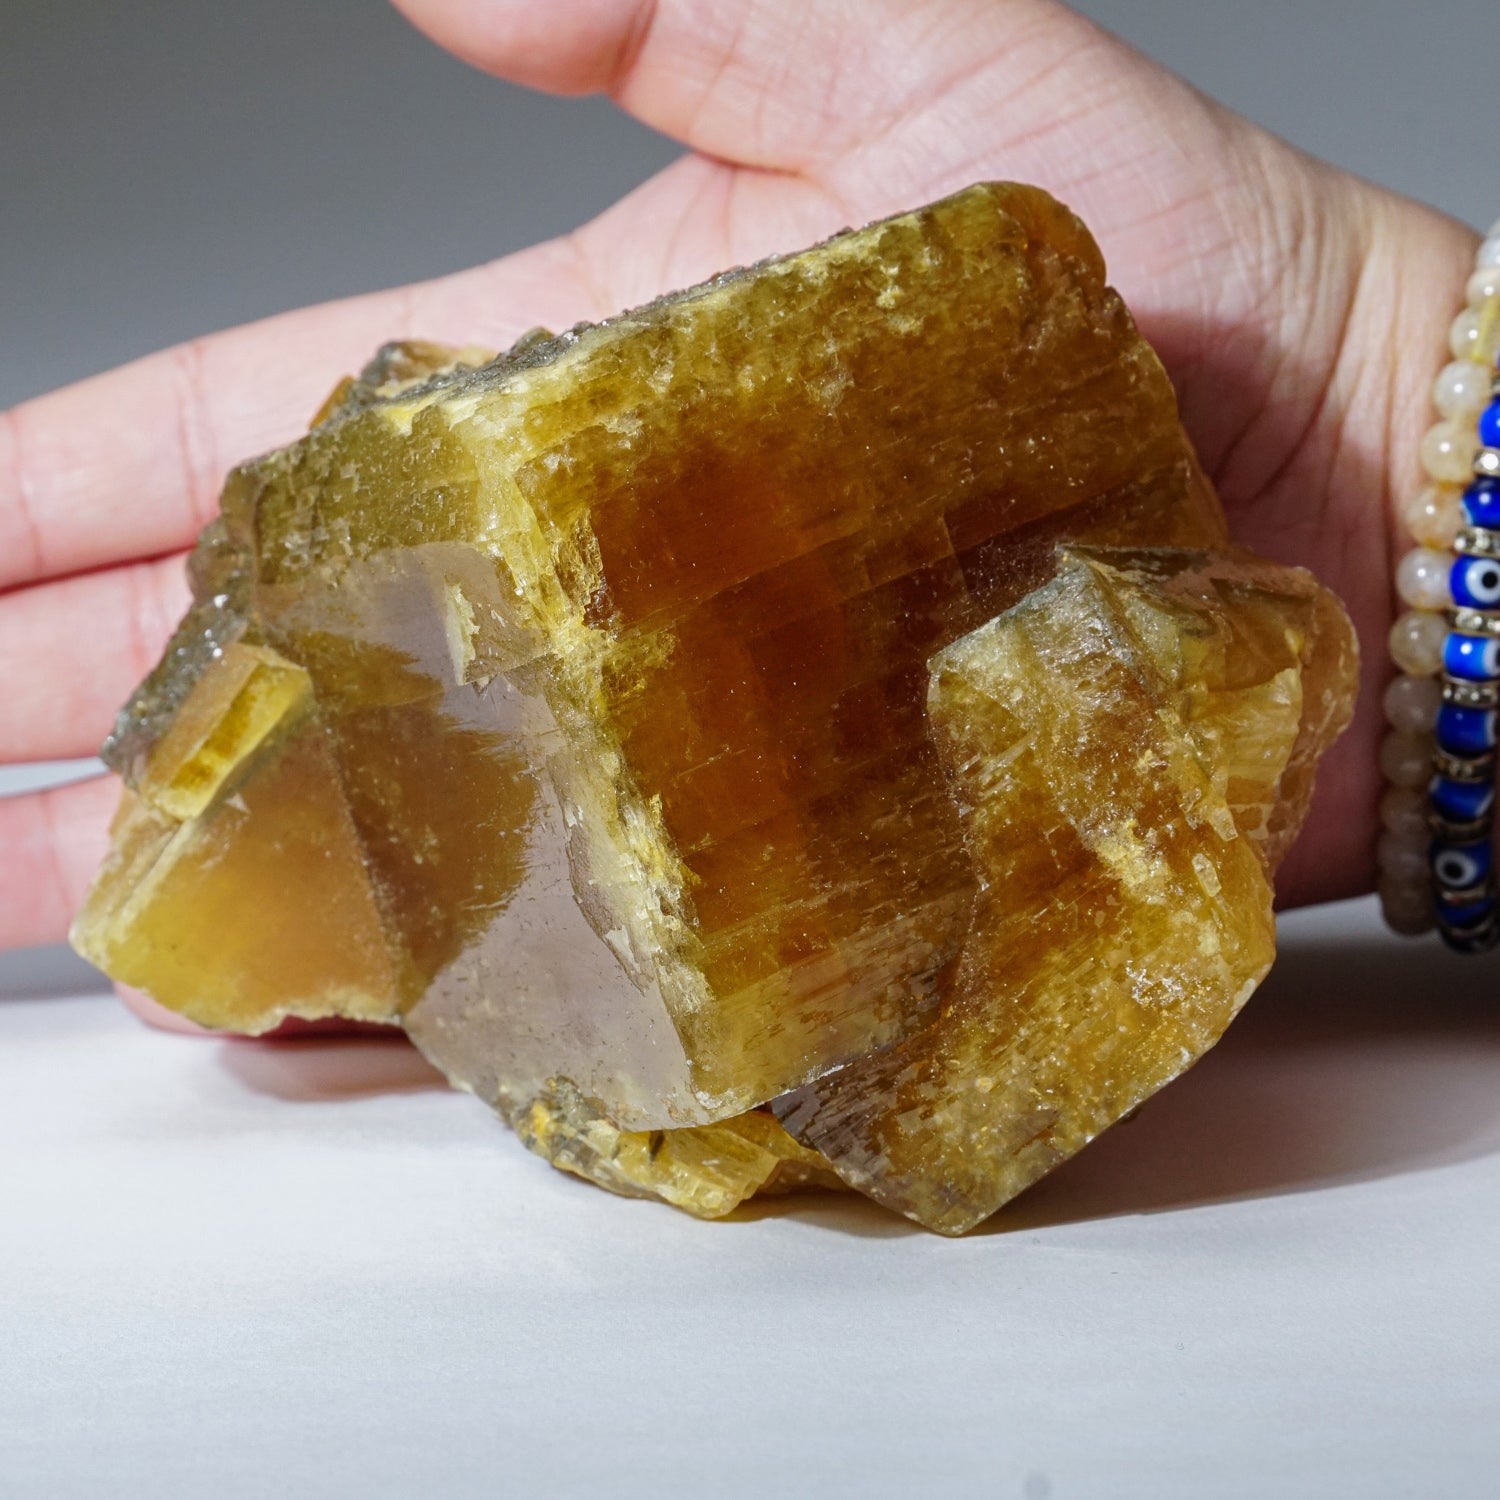 Golden Barite with Marcasite Crystals from Nandan County, Hechi, Guangxi, China.